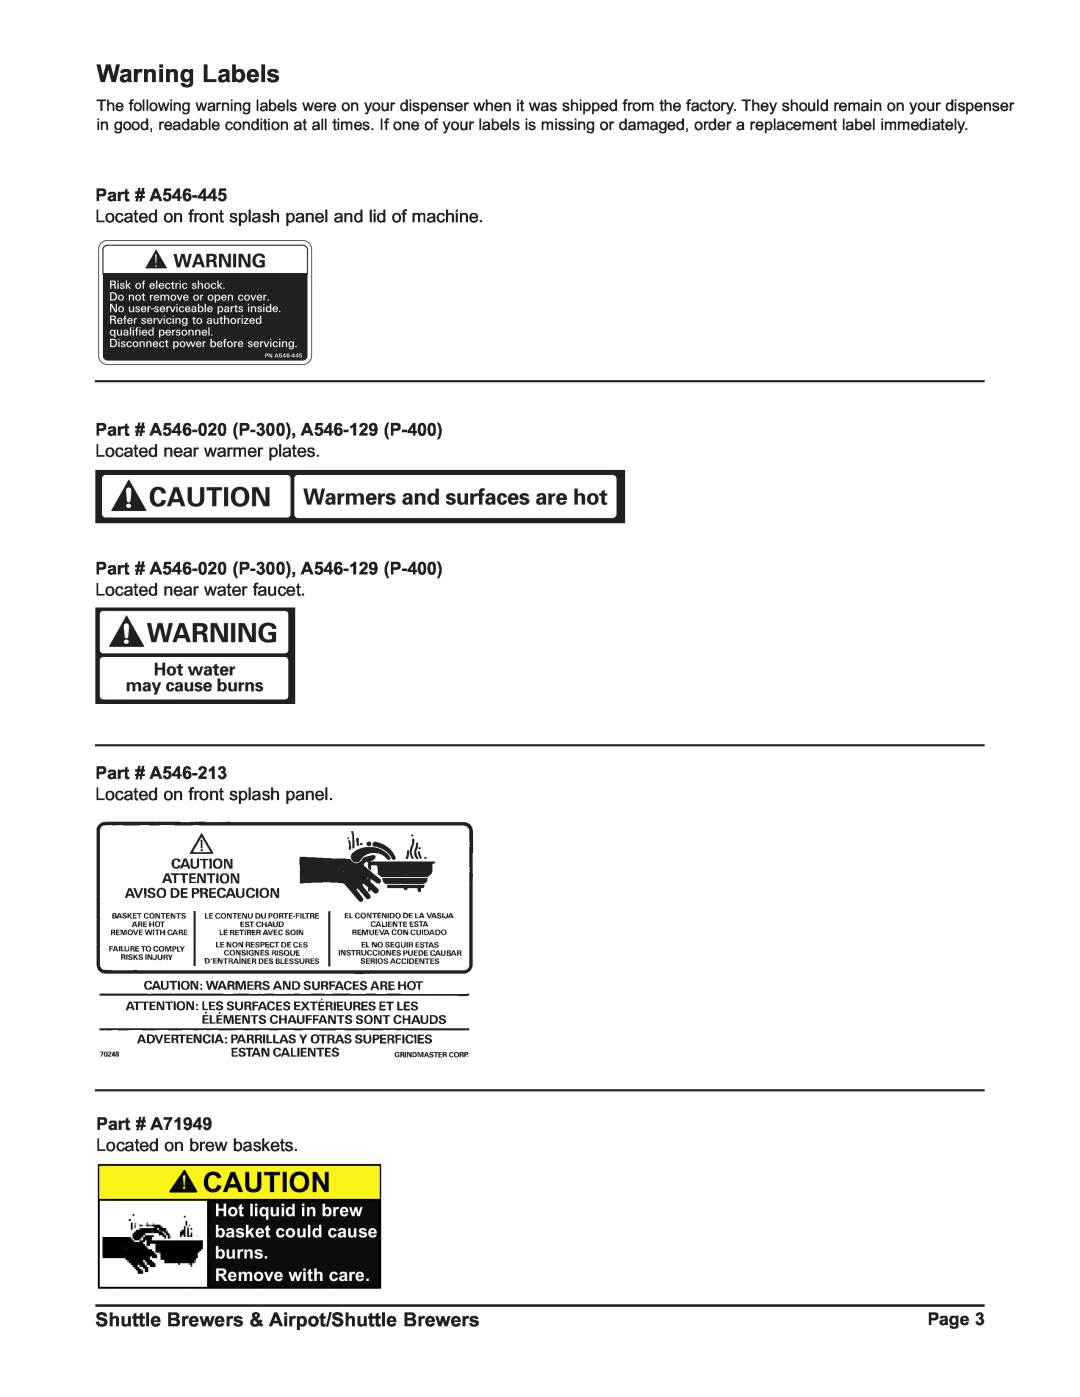 Grindmaster P400ESHP instruction manual Warning Labels, Shuttle Brewers & Airpot/Shuttle Brewers, Page 